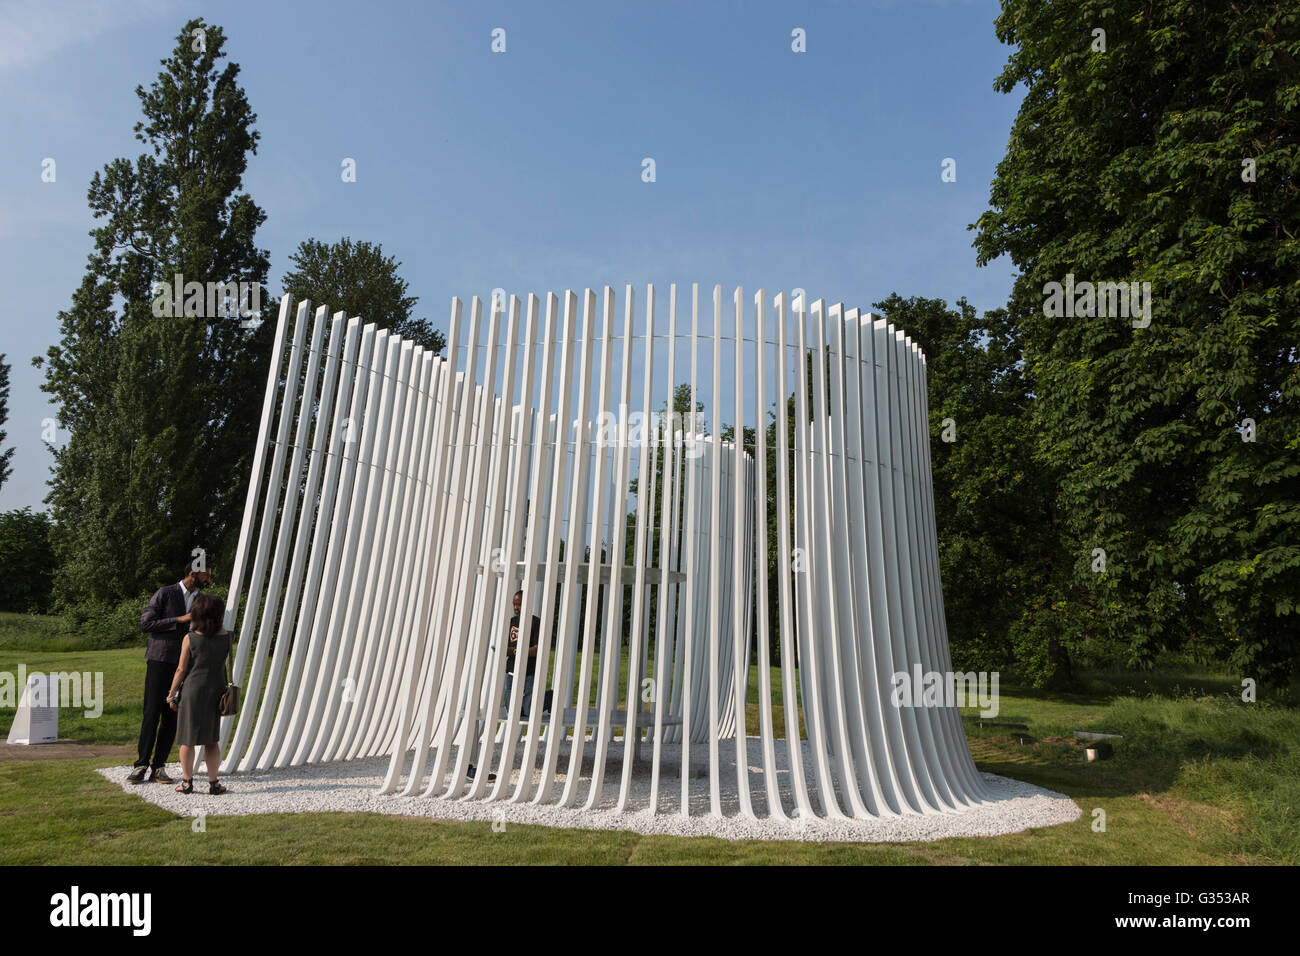 London, UK. 7 June 2016. Summer House designed by Asif Khan. The Serpentine reveals the completed structures for its expanded Architecture Programme for 2016: the 16th annual Pavilion designed by Bjarke Ingels Group (BIG) and four newly commissioned Summer Houses by Kunle Adeyemi (NLE), Barkow Leibinger, Yona Friedman and Asif Khan. The pavilion and summer houses are free to view from 10 June to 9 October 2016. Stock Photo